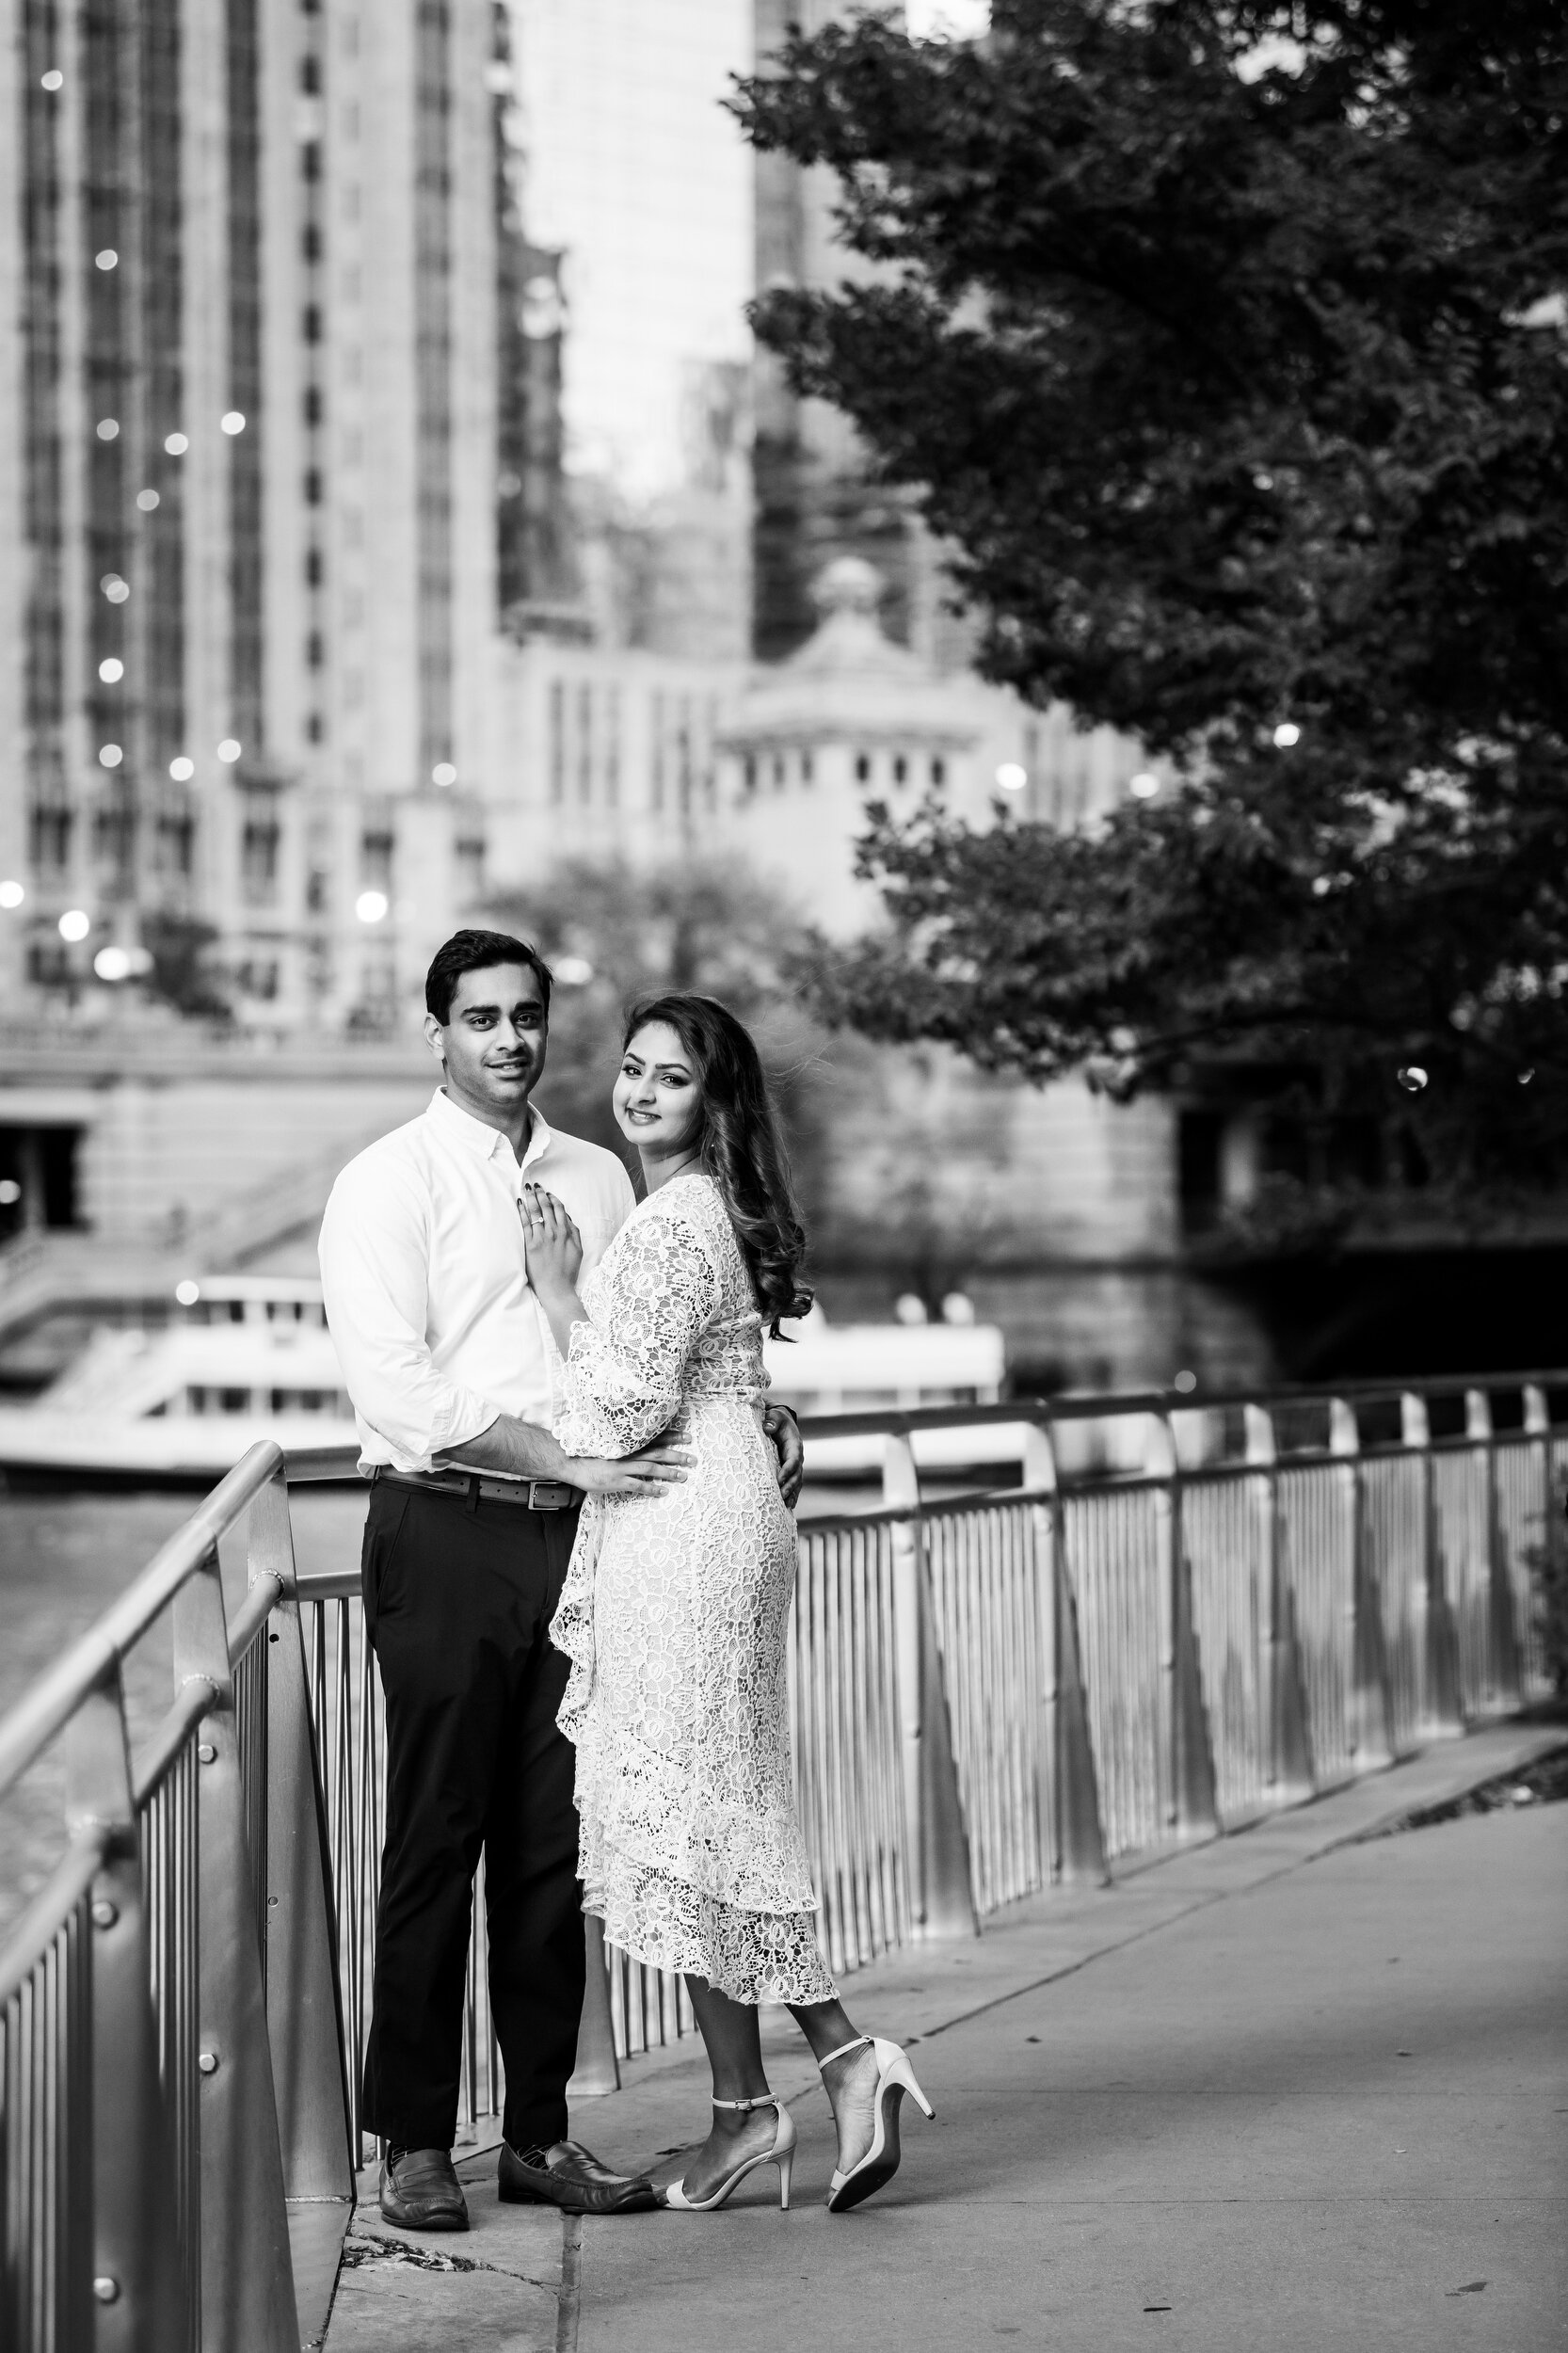 Chicago engagement photo along the Chicago River.